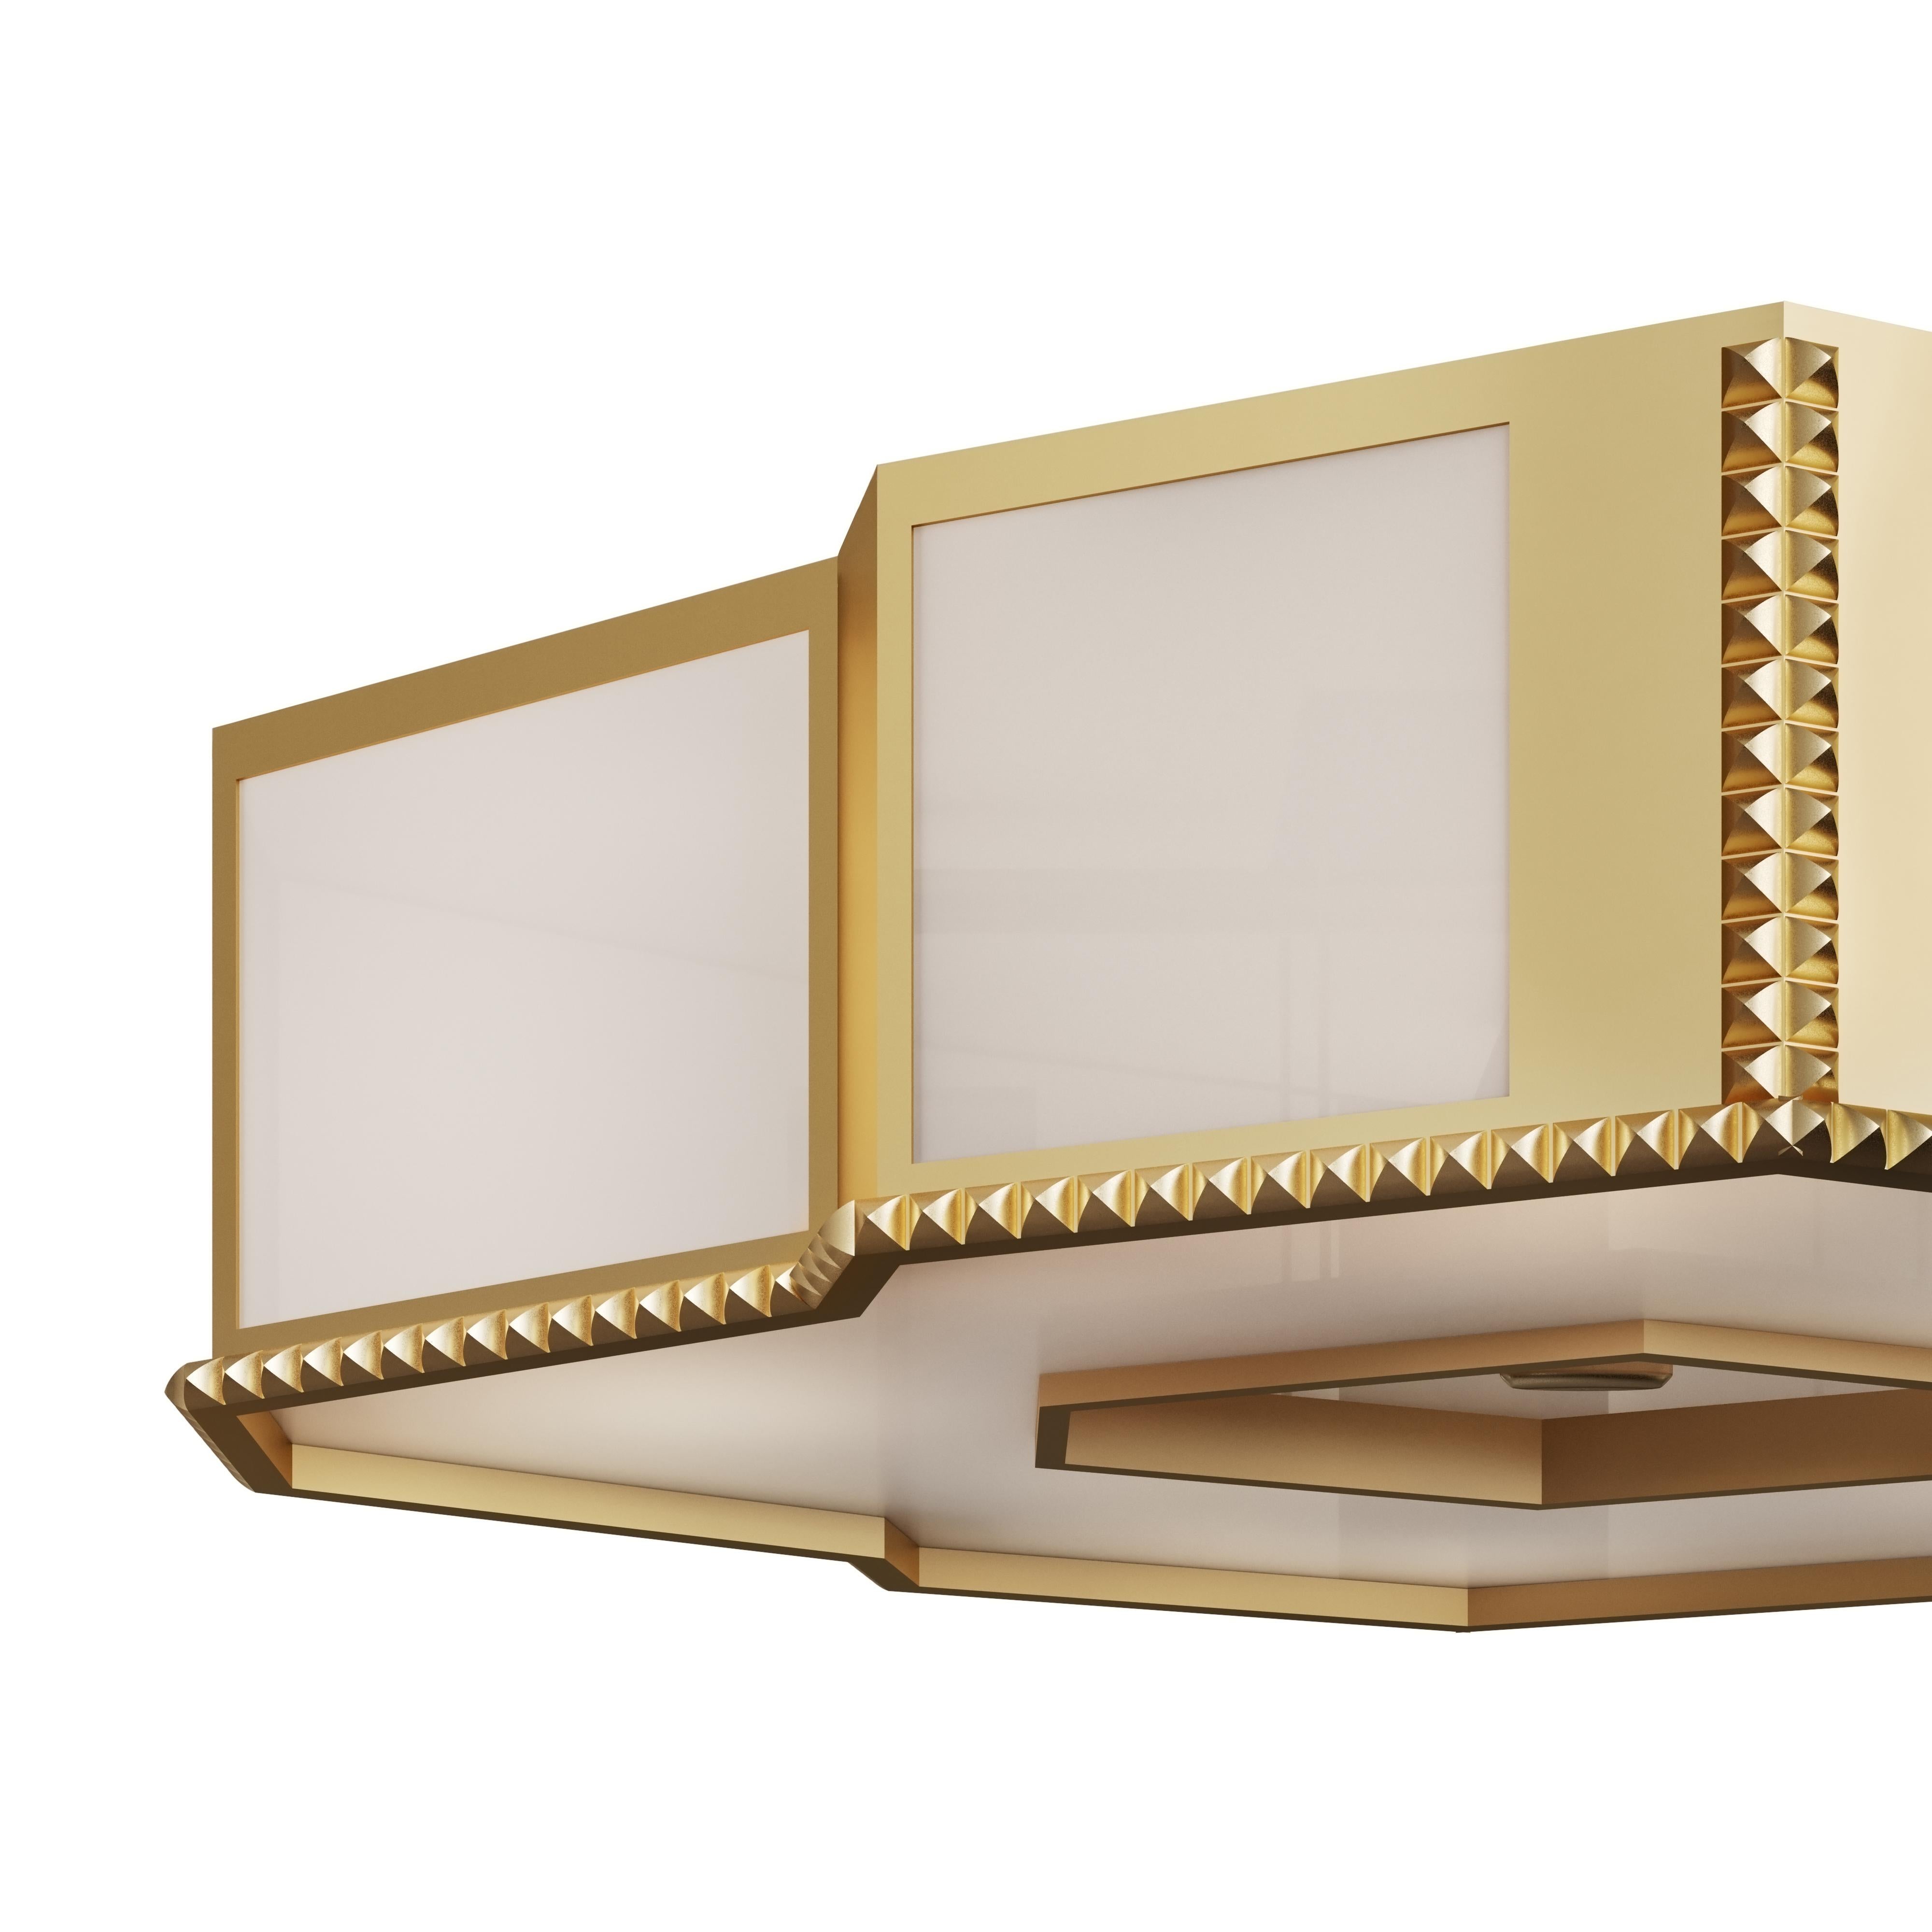 A brass and transparent white lucite flush mounted light fixture with cast nailhead trim and removable section on underside and lightly antiqued brass finish. Alternate finishes available. Made by David Duncan Studio, New York.
    